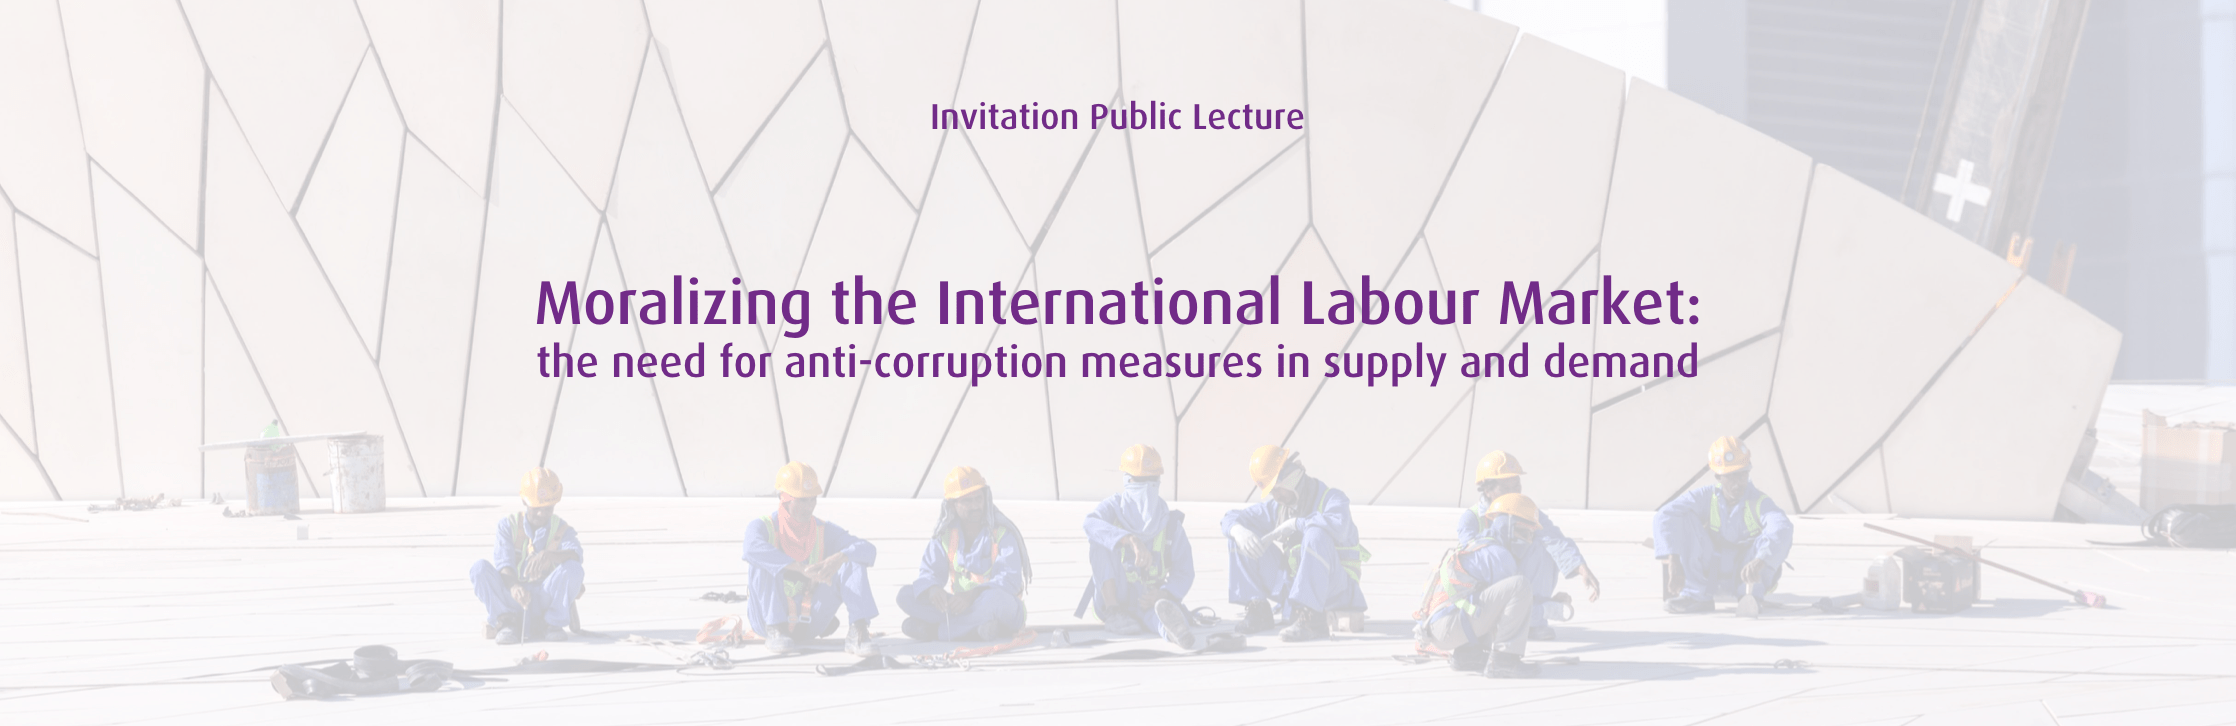 [Update: Photos] Moralizing the International Labour Market: the need for anti-corruption measures in supply and demand